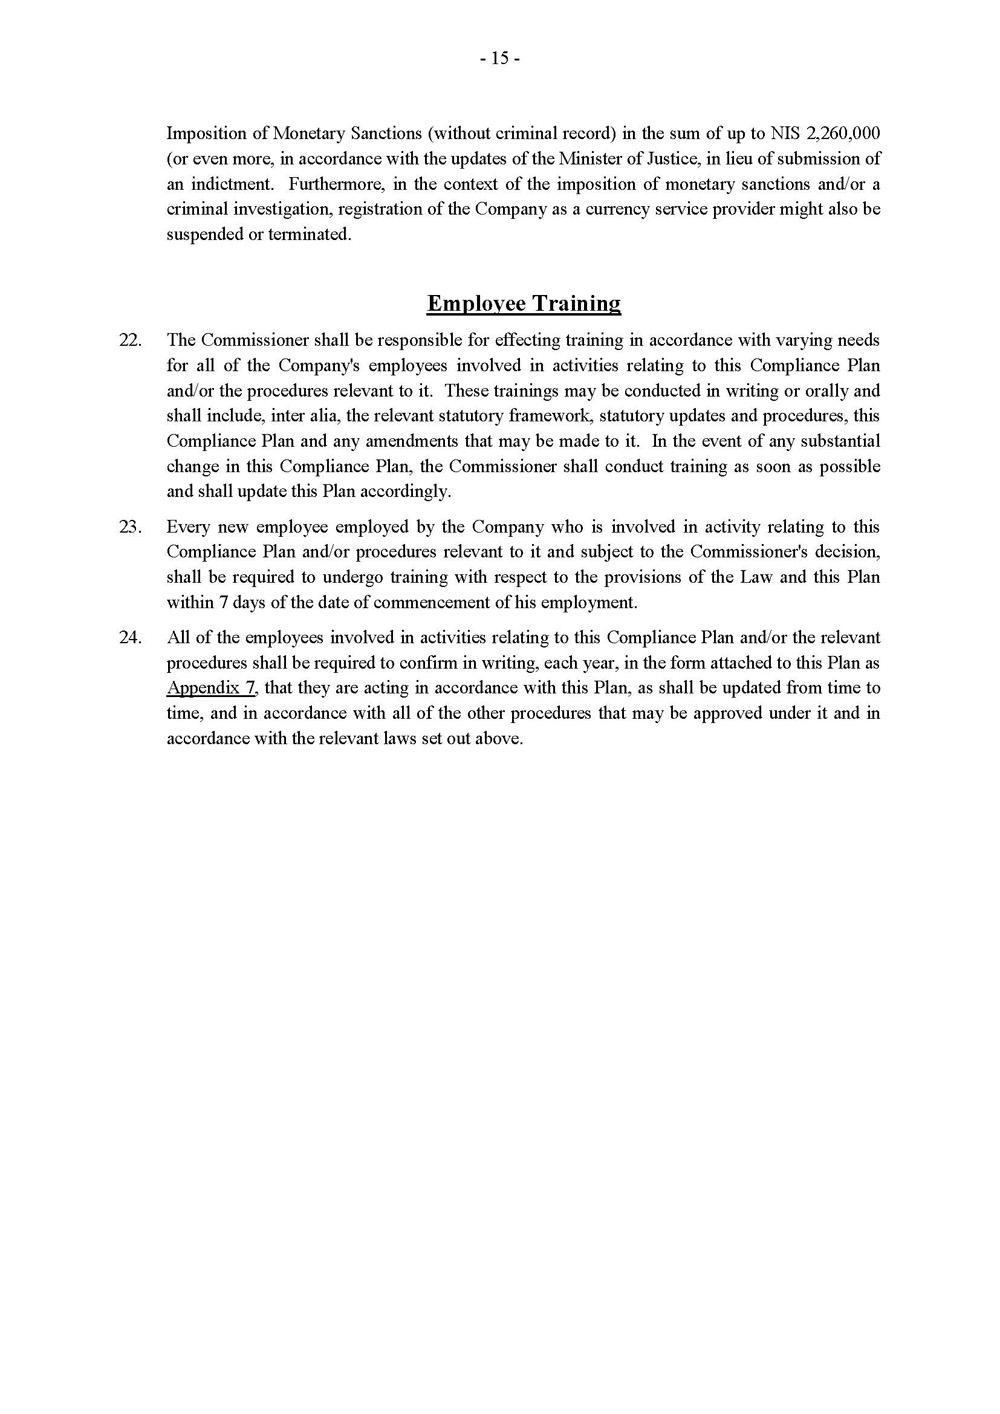 Biteach Compliance Plan - Money Laundering Law English_Page_15